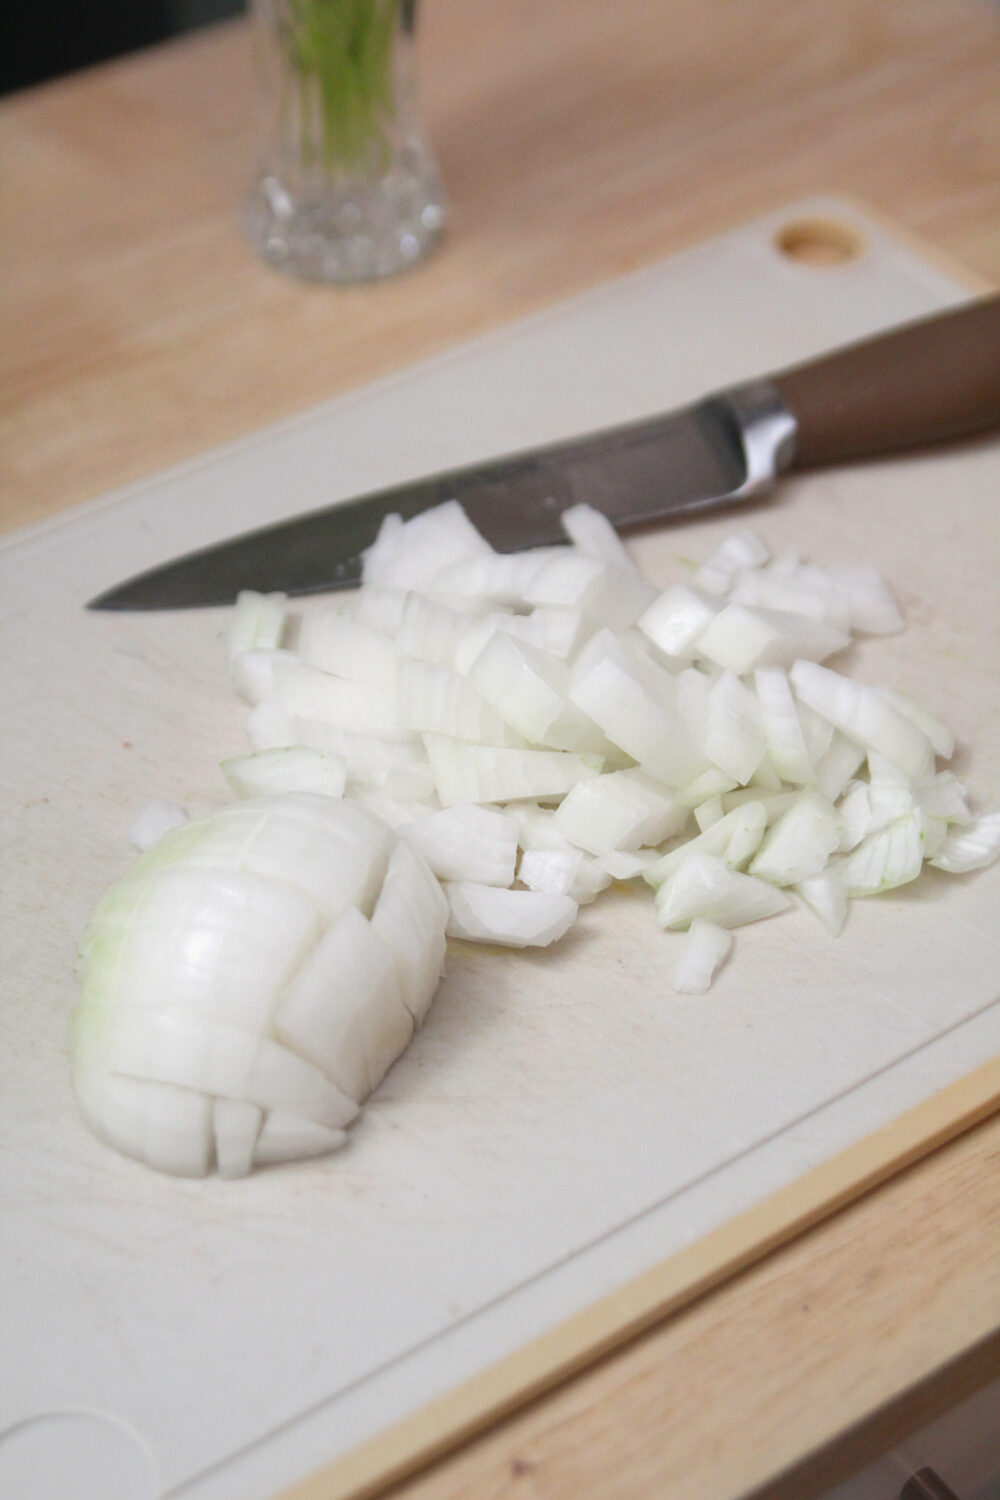 A chopped onion is shown on a cutting board next to a knife. Half of the onion is cut but in a half-moon shape and the rest is in a pile.